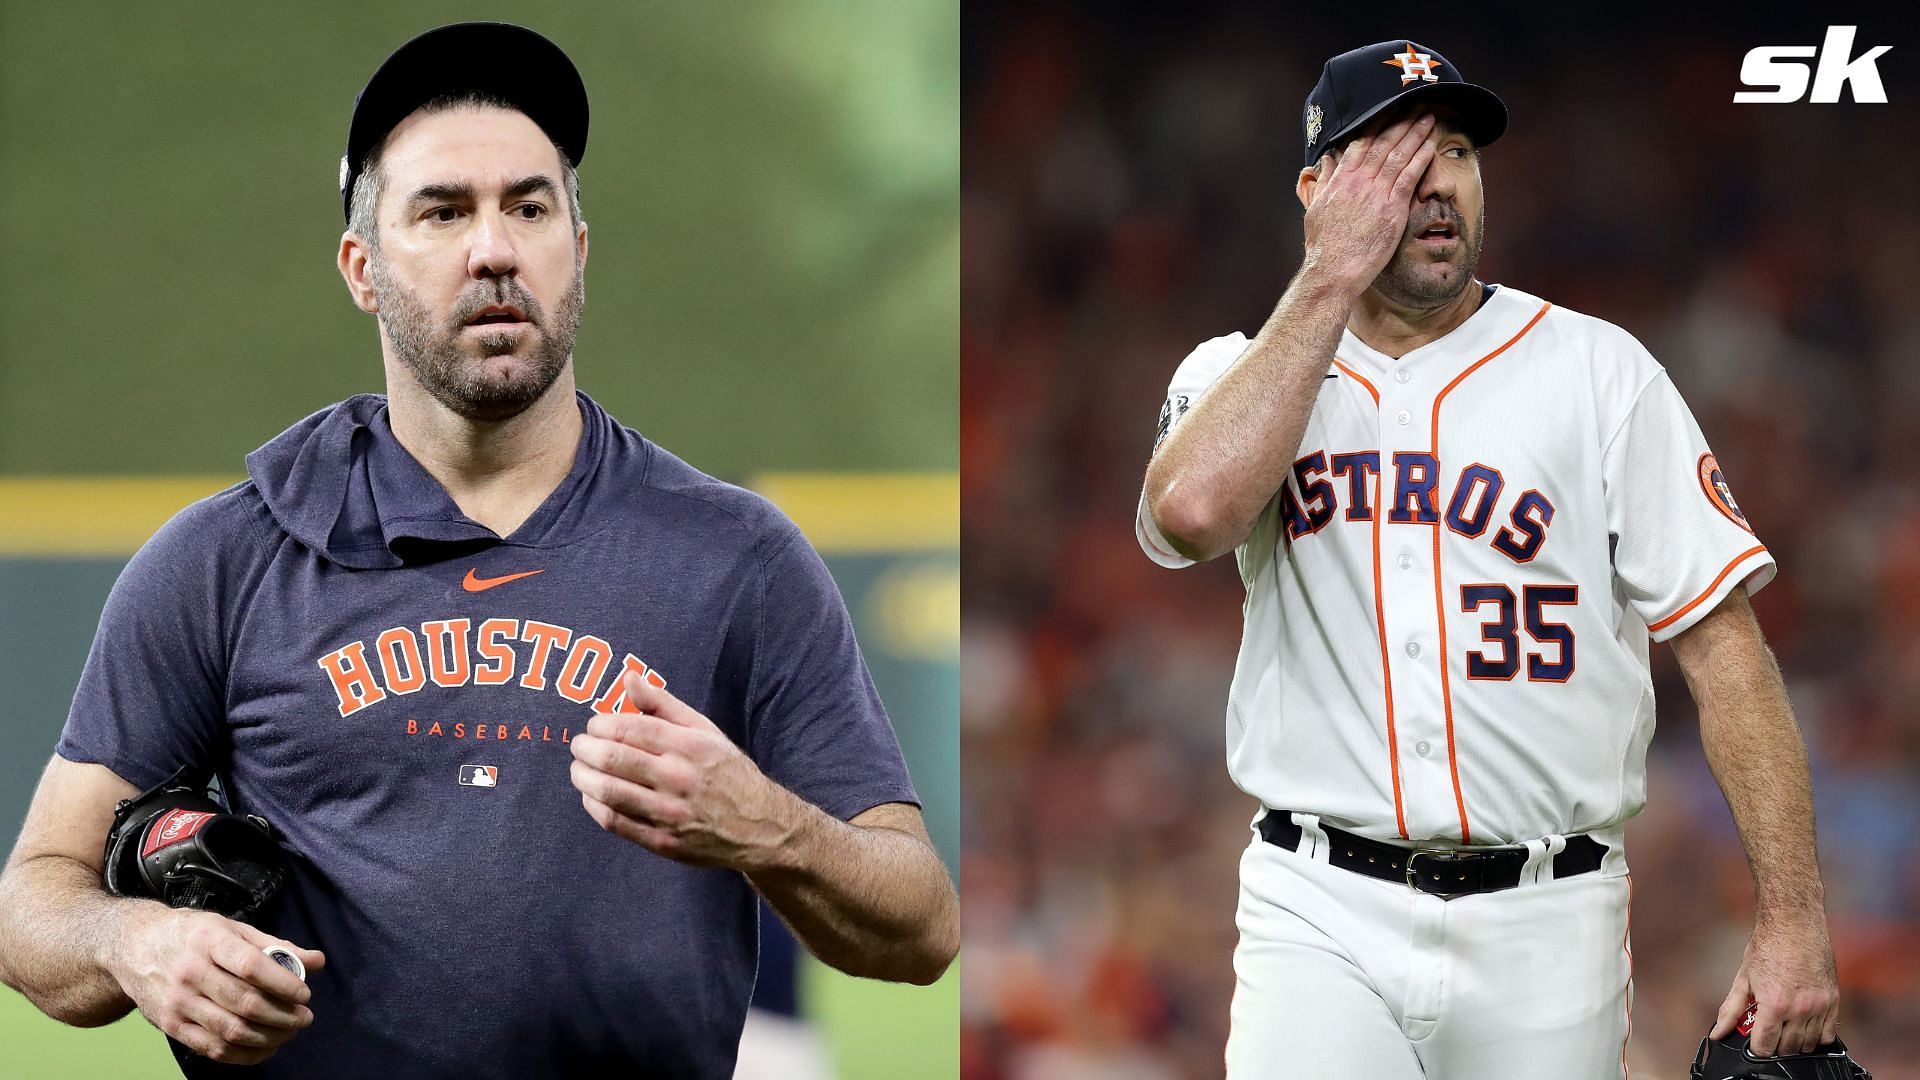 Justin Verlander remains frustrated, reflects on Astros loss despite strong second outing